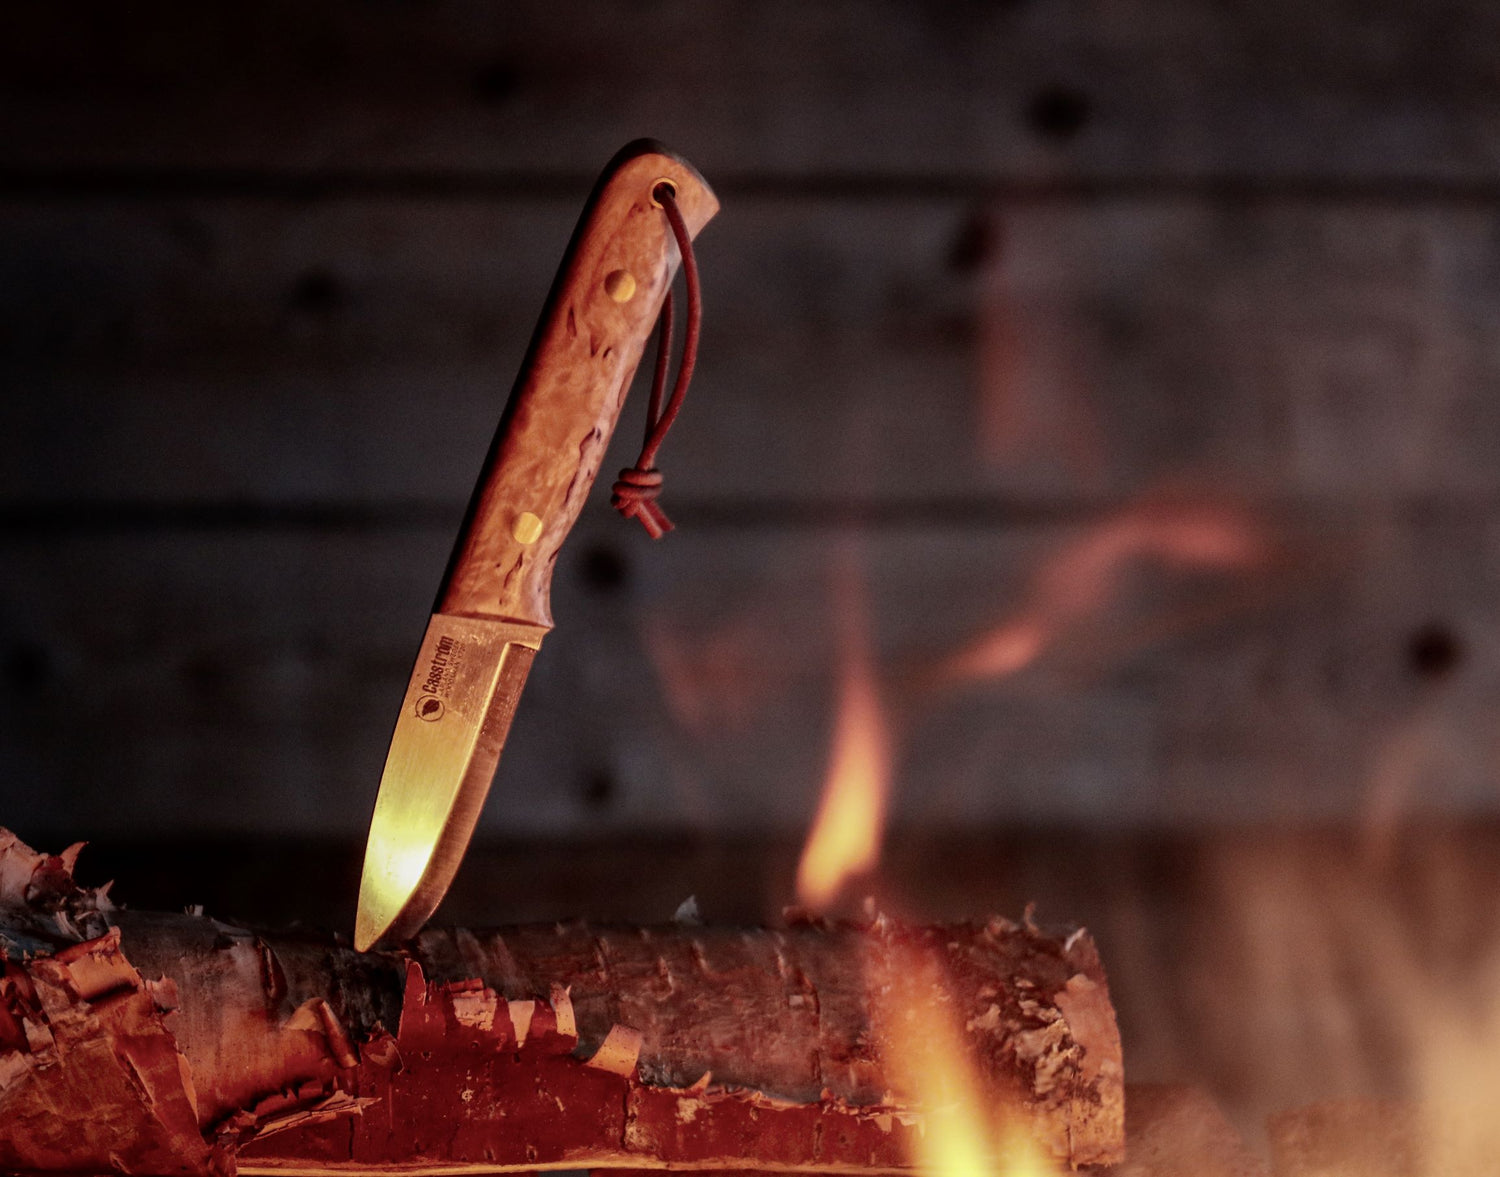 The Casstrom Woodsman knife next to a campfire, showing the curly birch handle and scandi grind blade